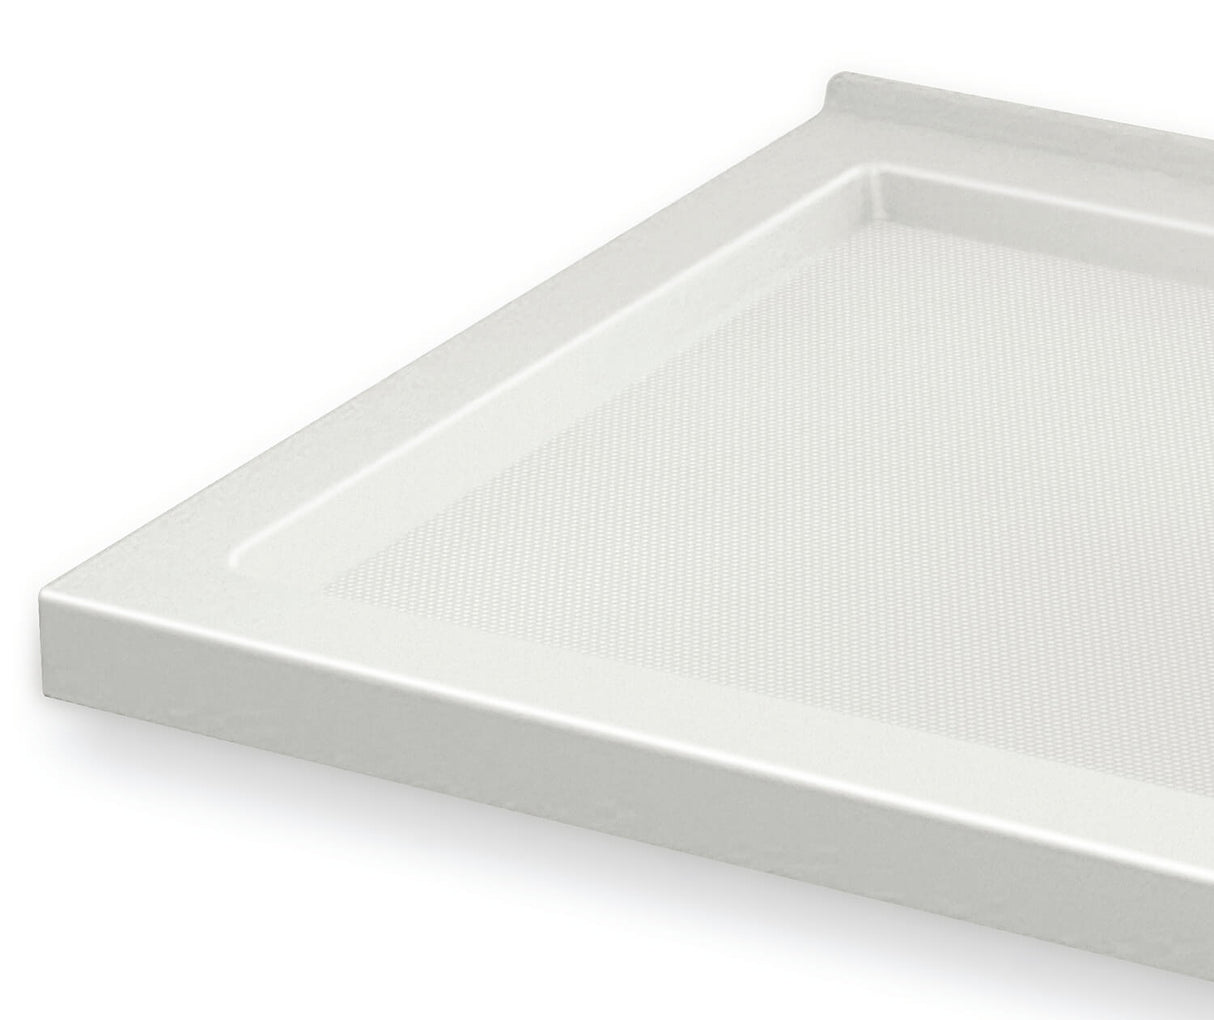 MAAX 410006-543-001-002 B3Round 6036 Acrylic Corner Right Shower Base in White with Anti-slip Bottom with Right-Hand Drain